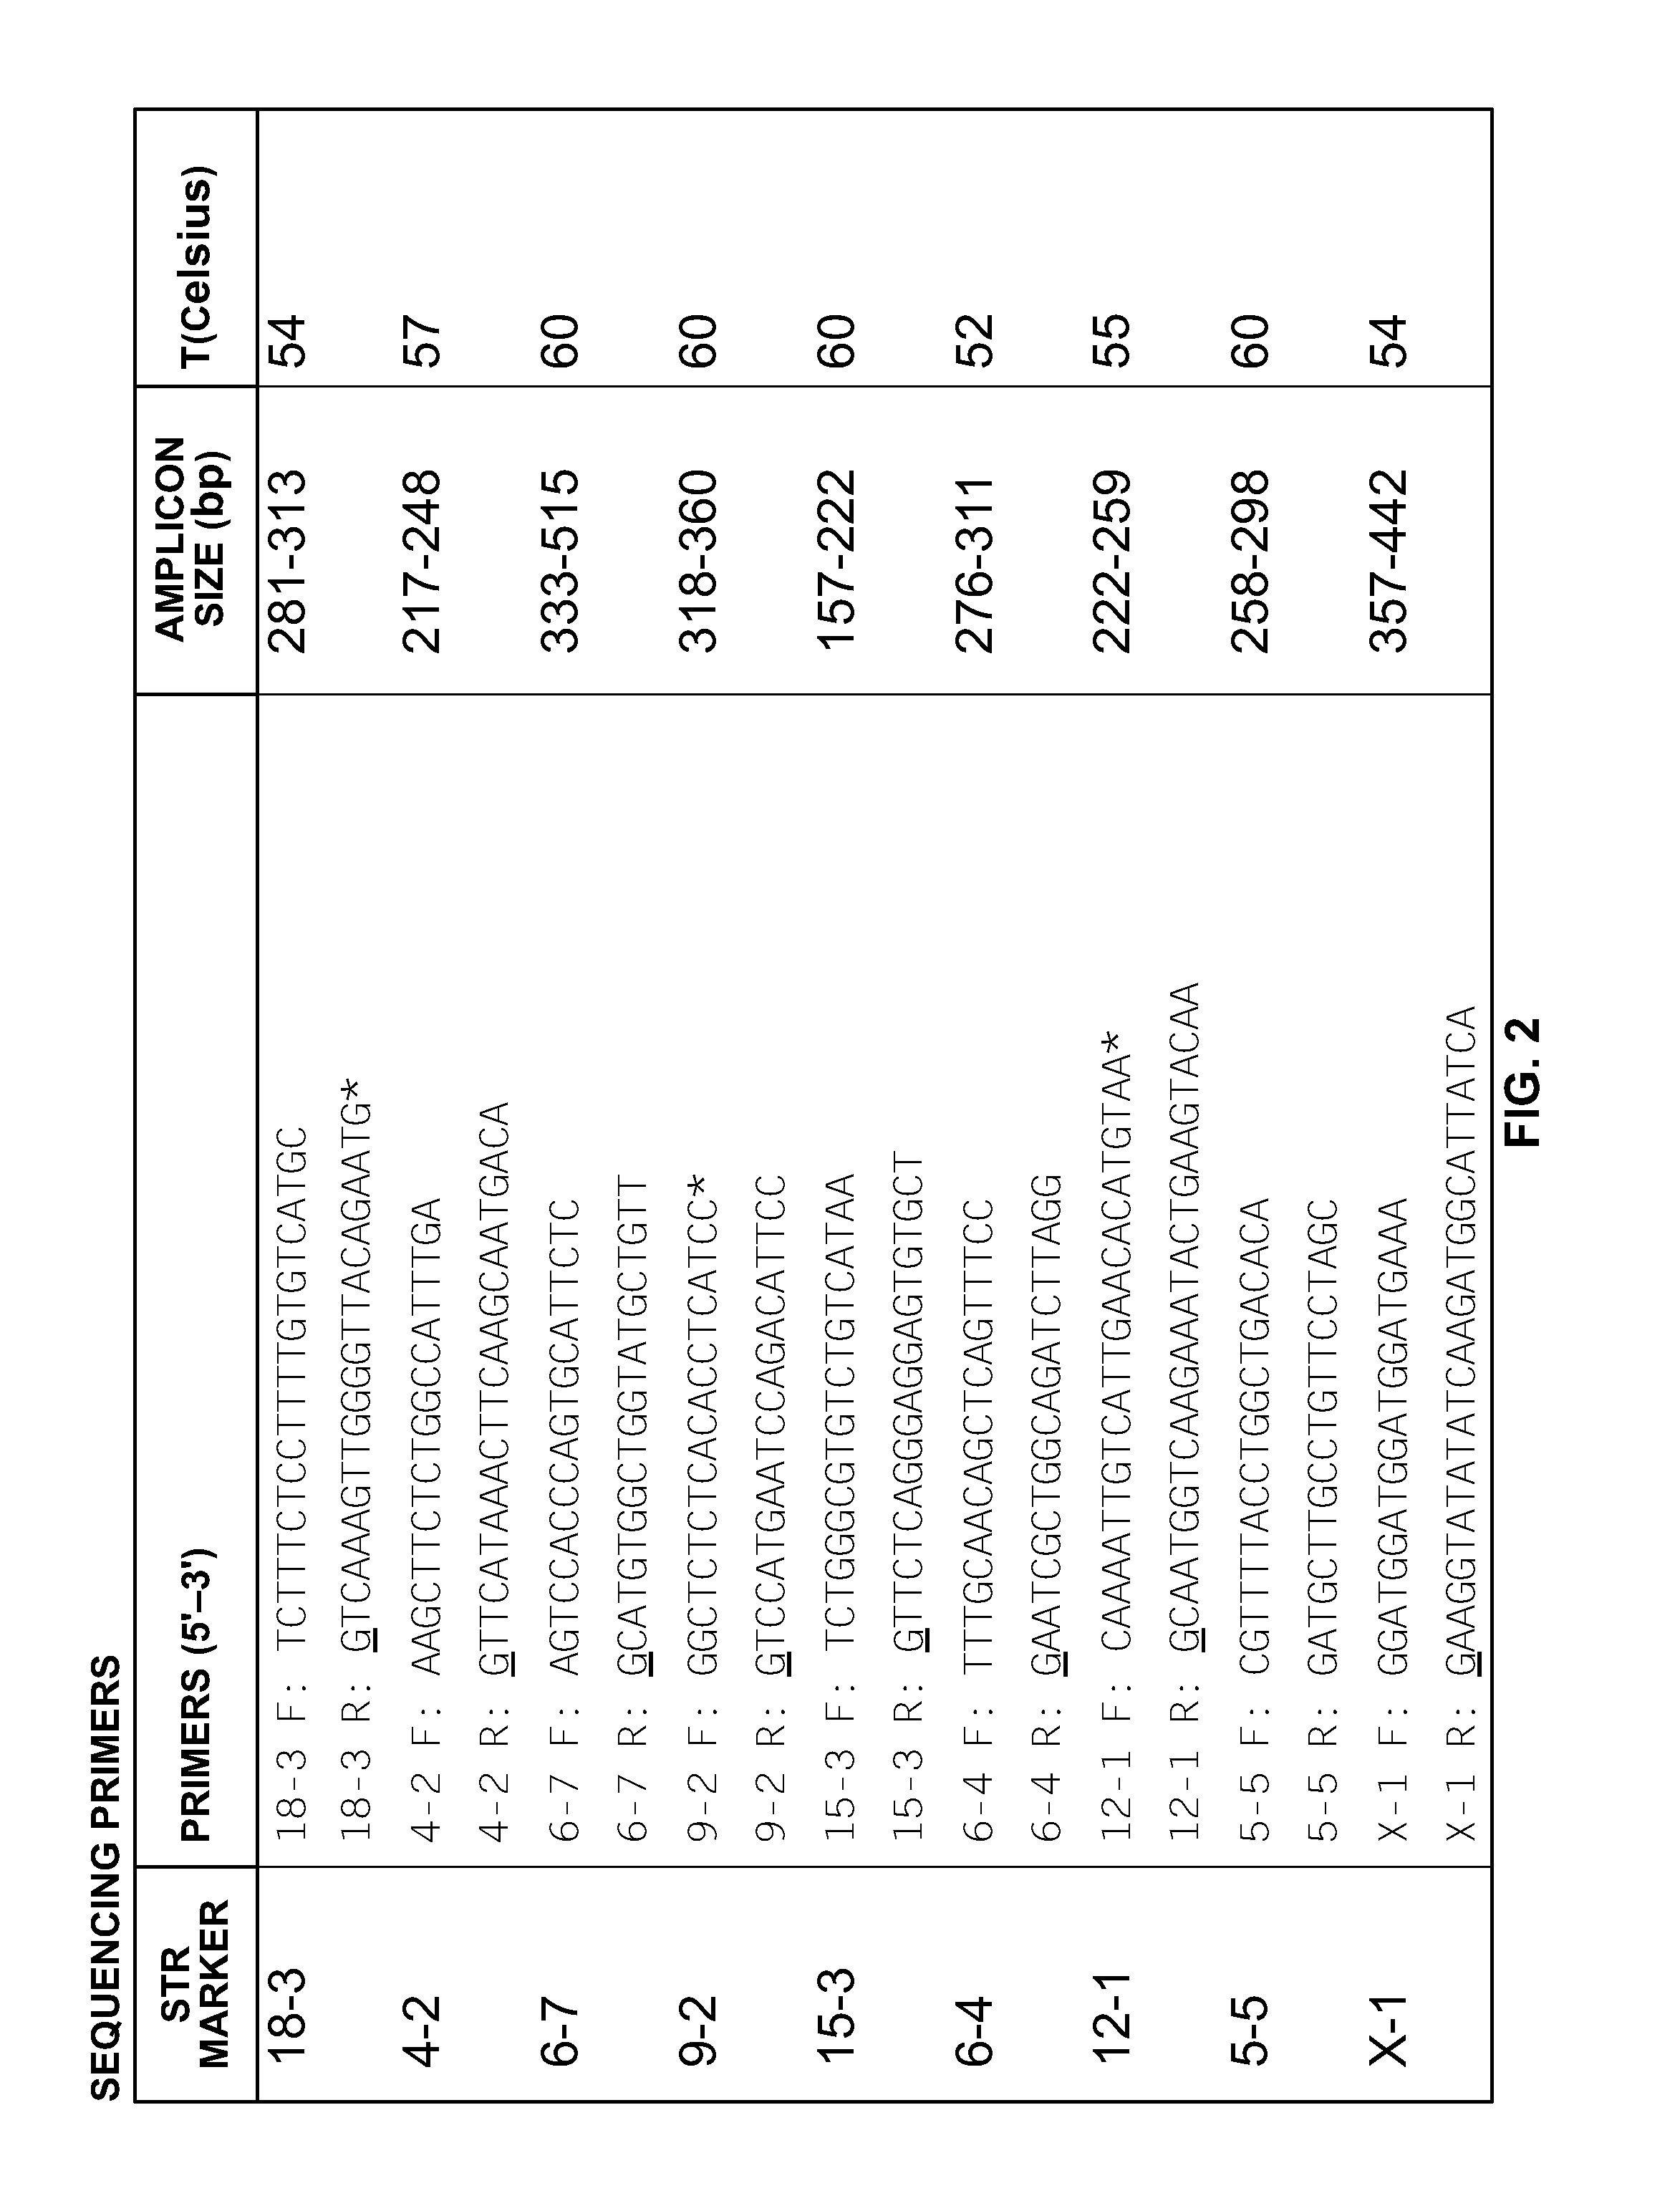 Mouse cell line authentication